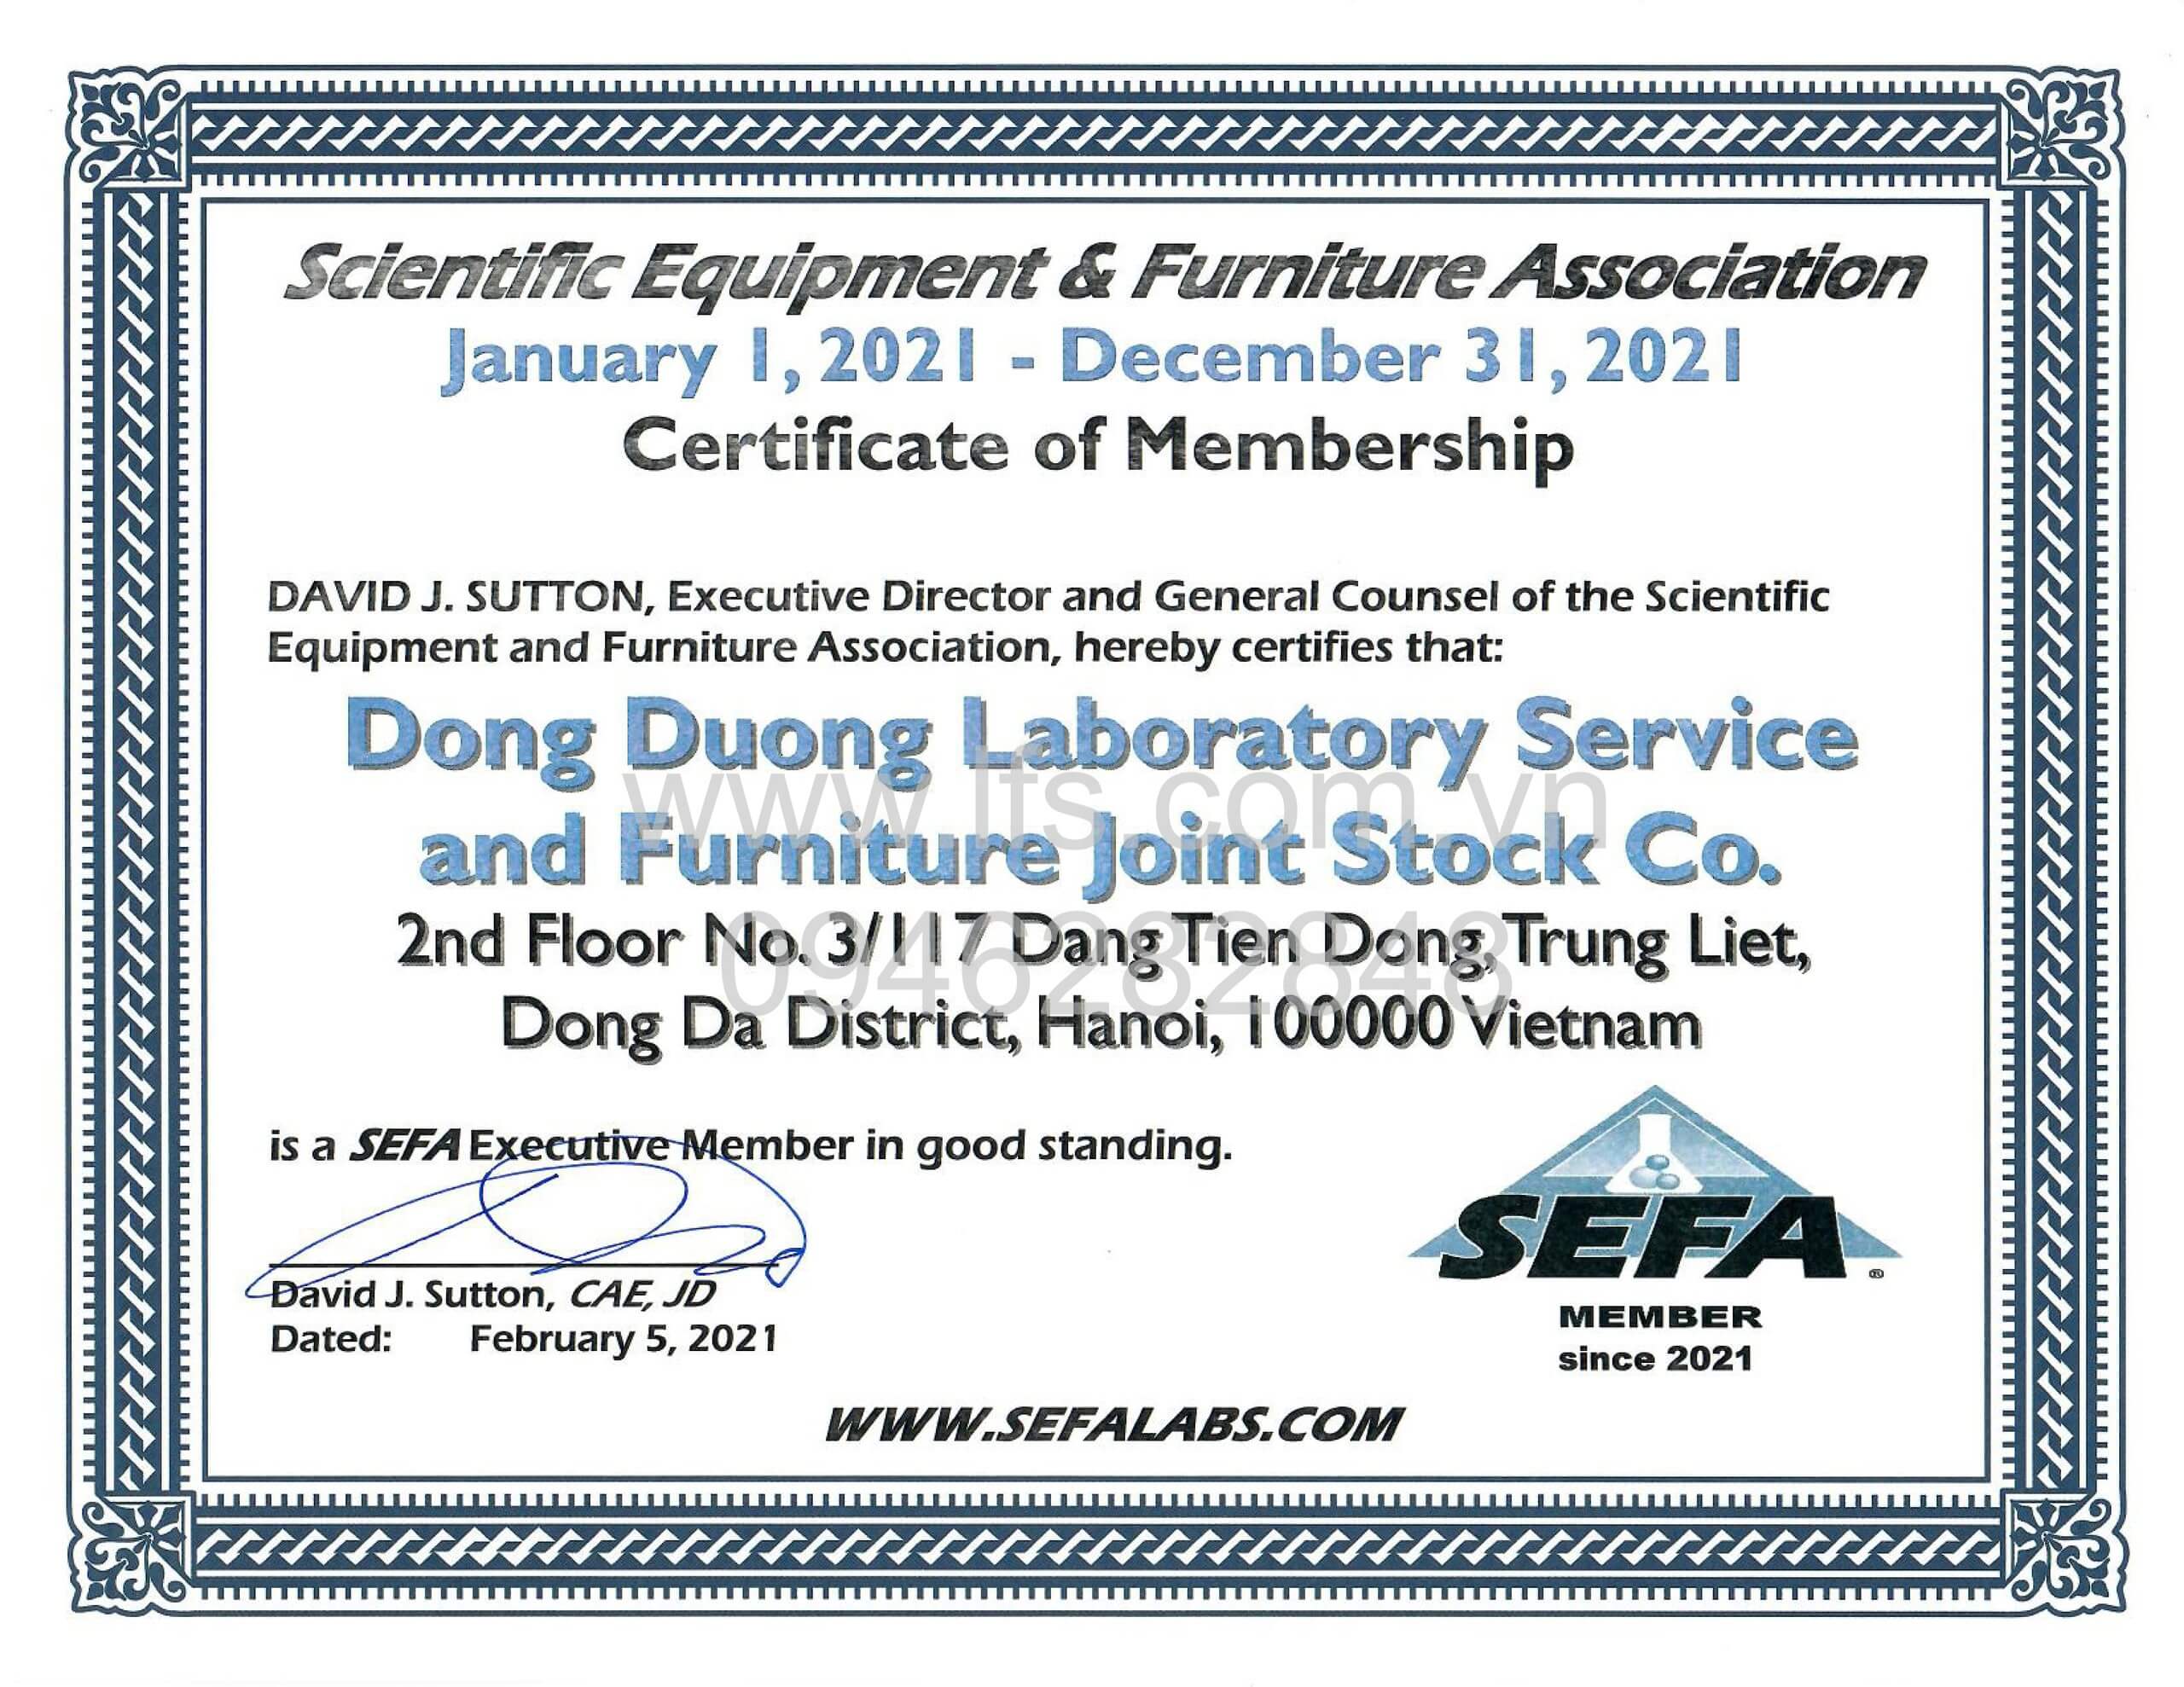 LFS officially becomes an executive member of SEFA